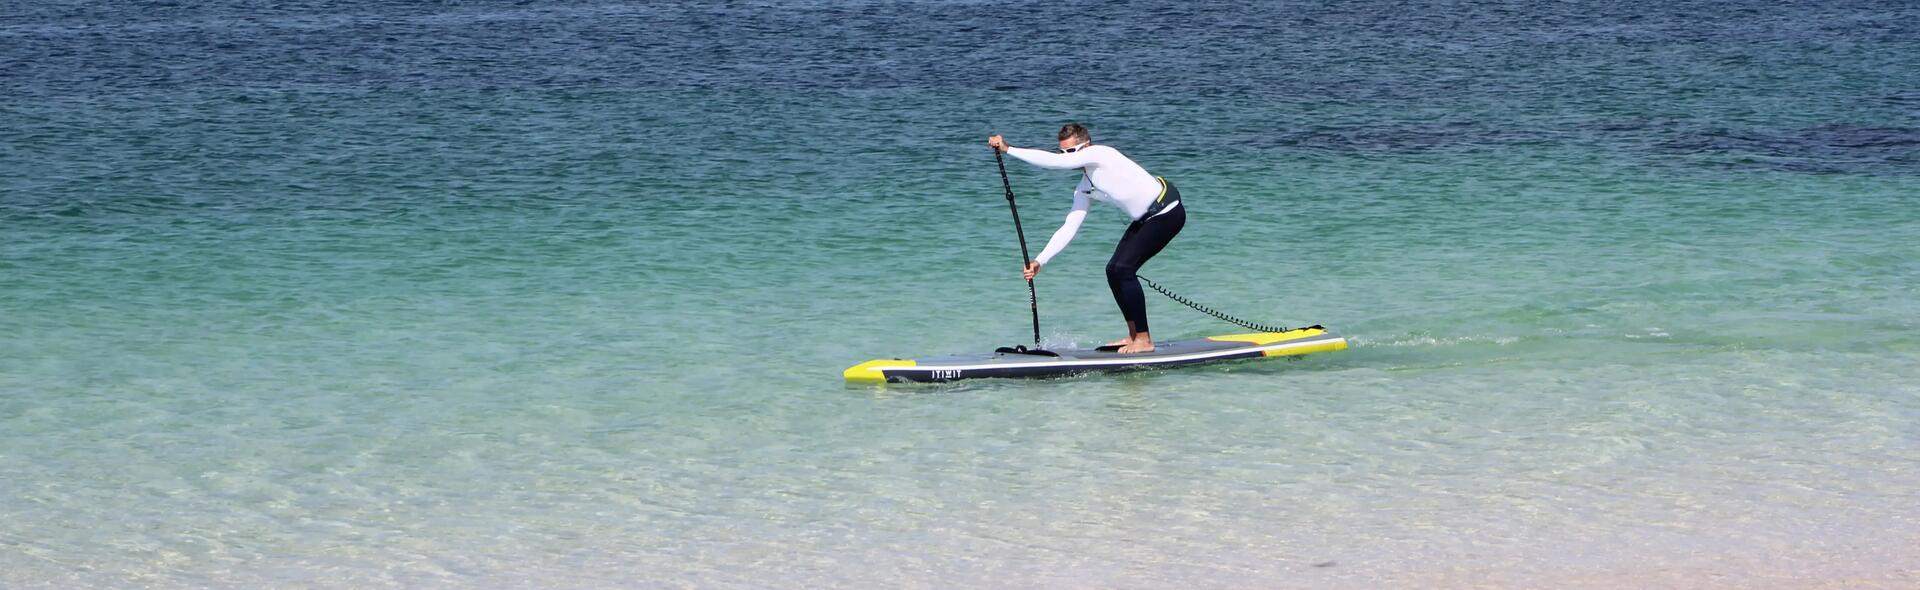 stand-up-paddle-escolher-a-pagaia-remo-pa